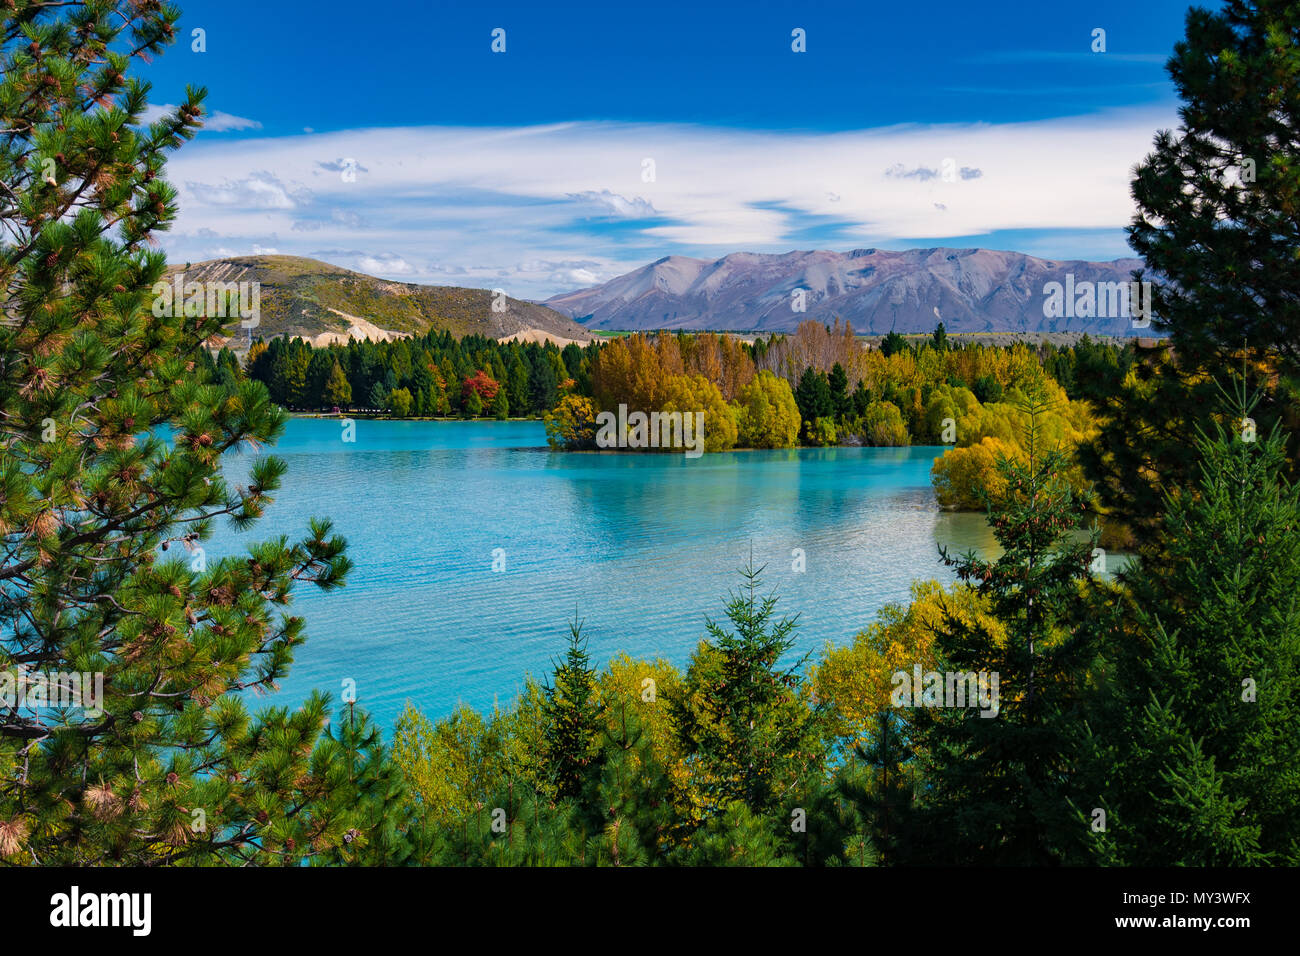 Lake surrounded by forest in autumn, South Island, New Zealand Stock Photo